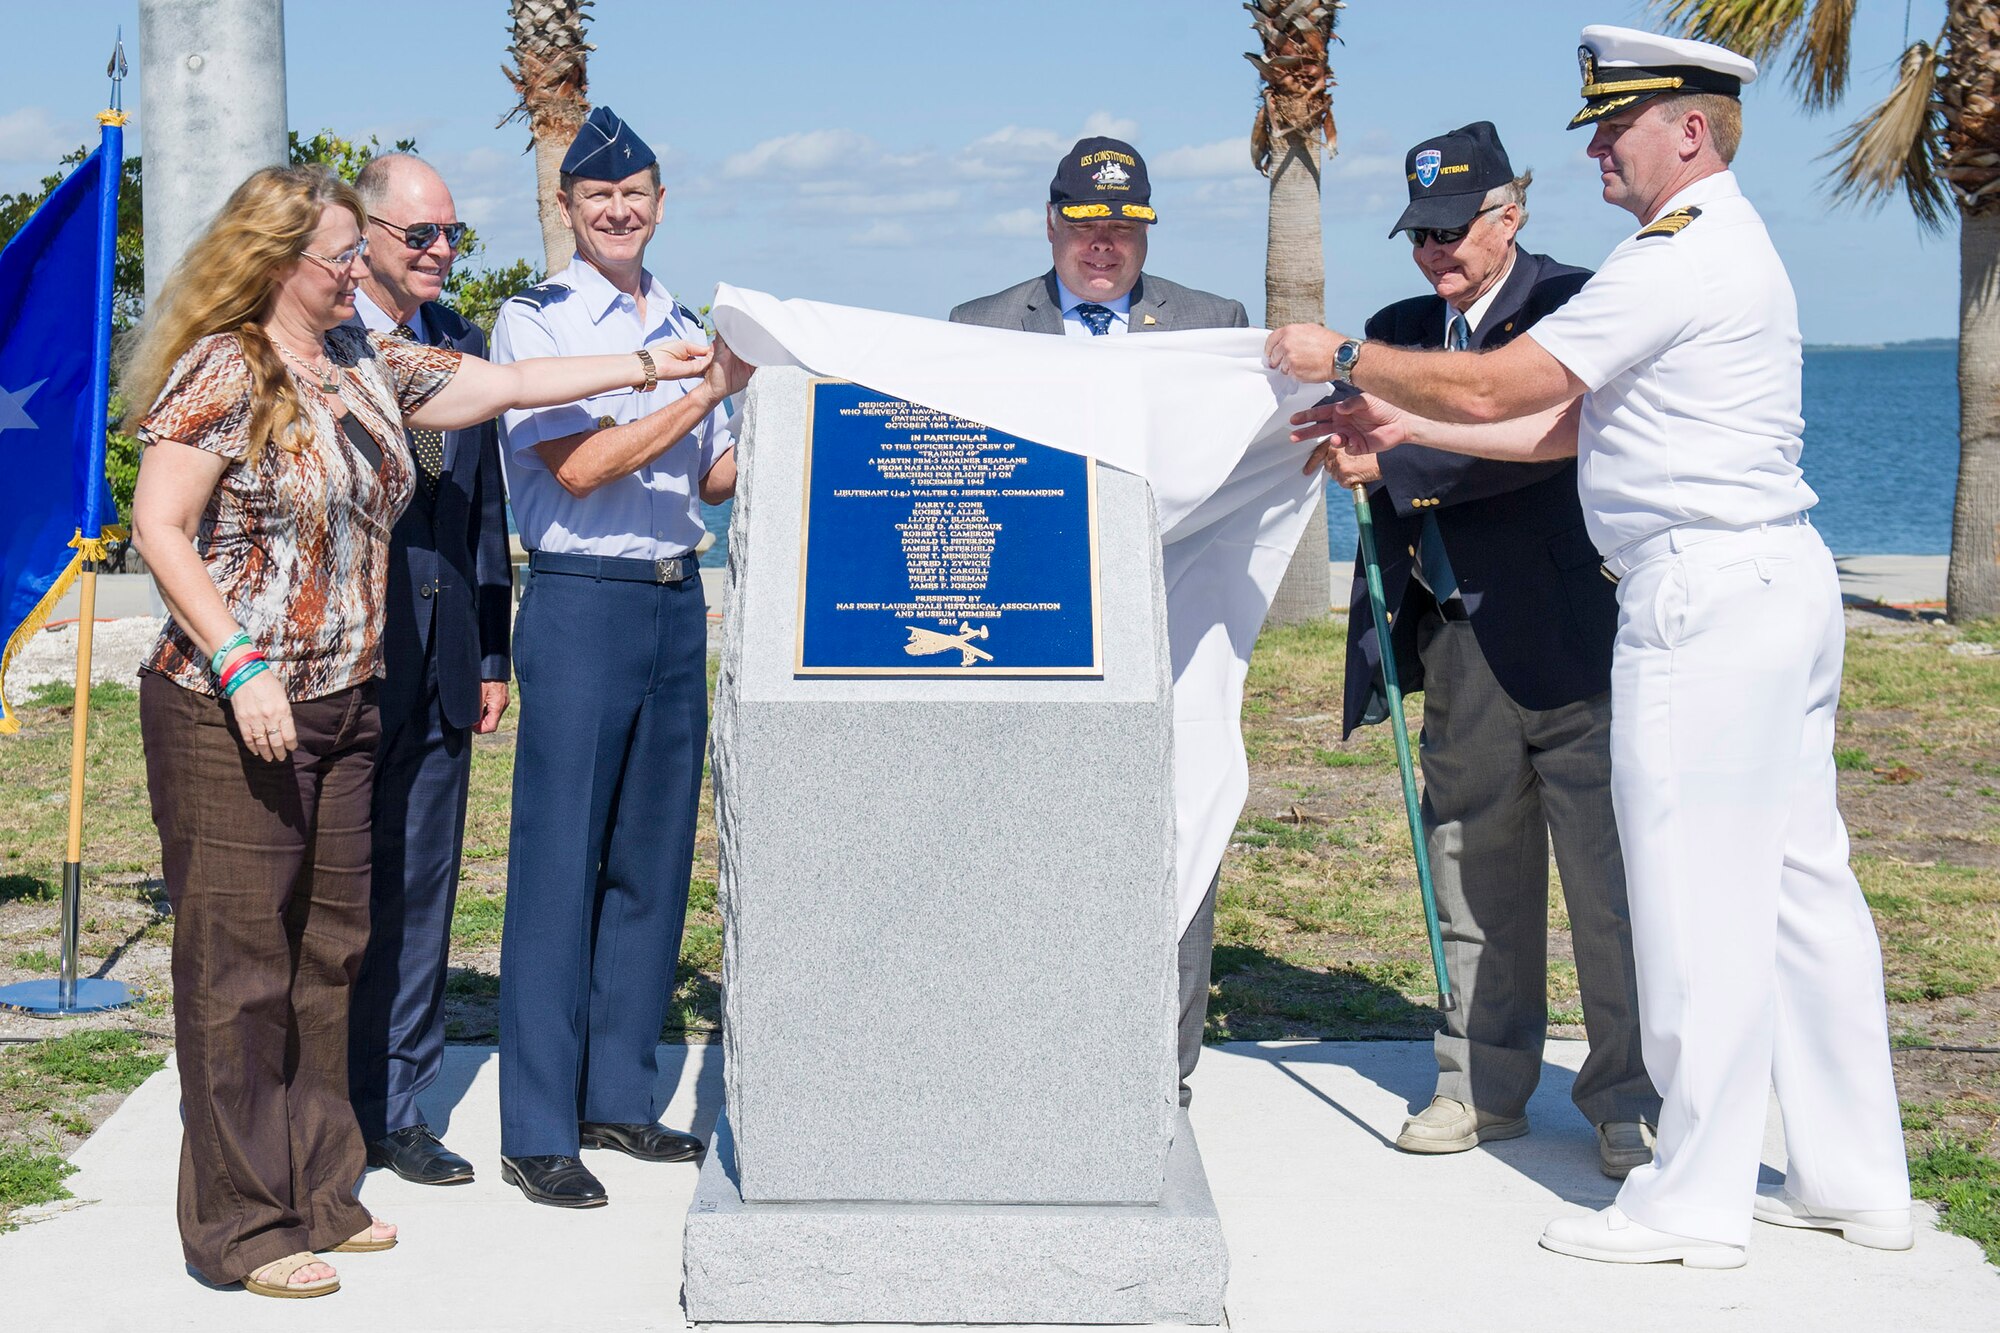 Debbie Wilson, daughter of Joh Myhre; Rep. Bill Posey, 8th District of Florida; Brig. Gen. Wayne Monteith, 45th Space Wing commander; Retired Navy Rear Admiral Samuel Cox, Naval history and heritage command director and curator; Retired Army Capt. Jon Myhre, Naval Air Station Fort Lauderdale historical association and museum member; and Capt. John Sager, Naval Ordnance Test Unit commander, unveil the Banana River Naval Air Station Monument during a ceremony April 11, 2017, at Patrick Air Force Base, Fla. The 45th Space Wing hosted a dedication ceremony for the Martin PBM-5 Mariner Memorial honoring 13 service members who lost their lives during a rescue mission supporting the 1945 disappearance of Flight 19.  (U.S. Air Force photo by Phil Sunkel) 